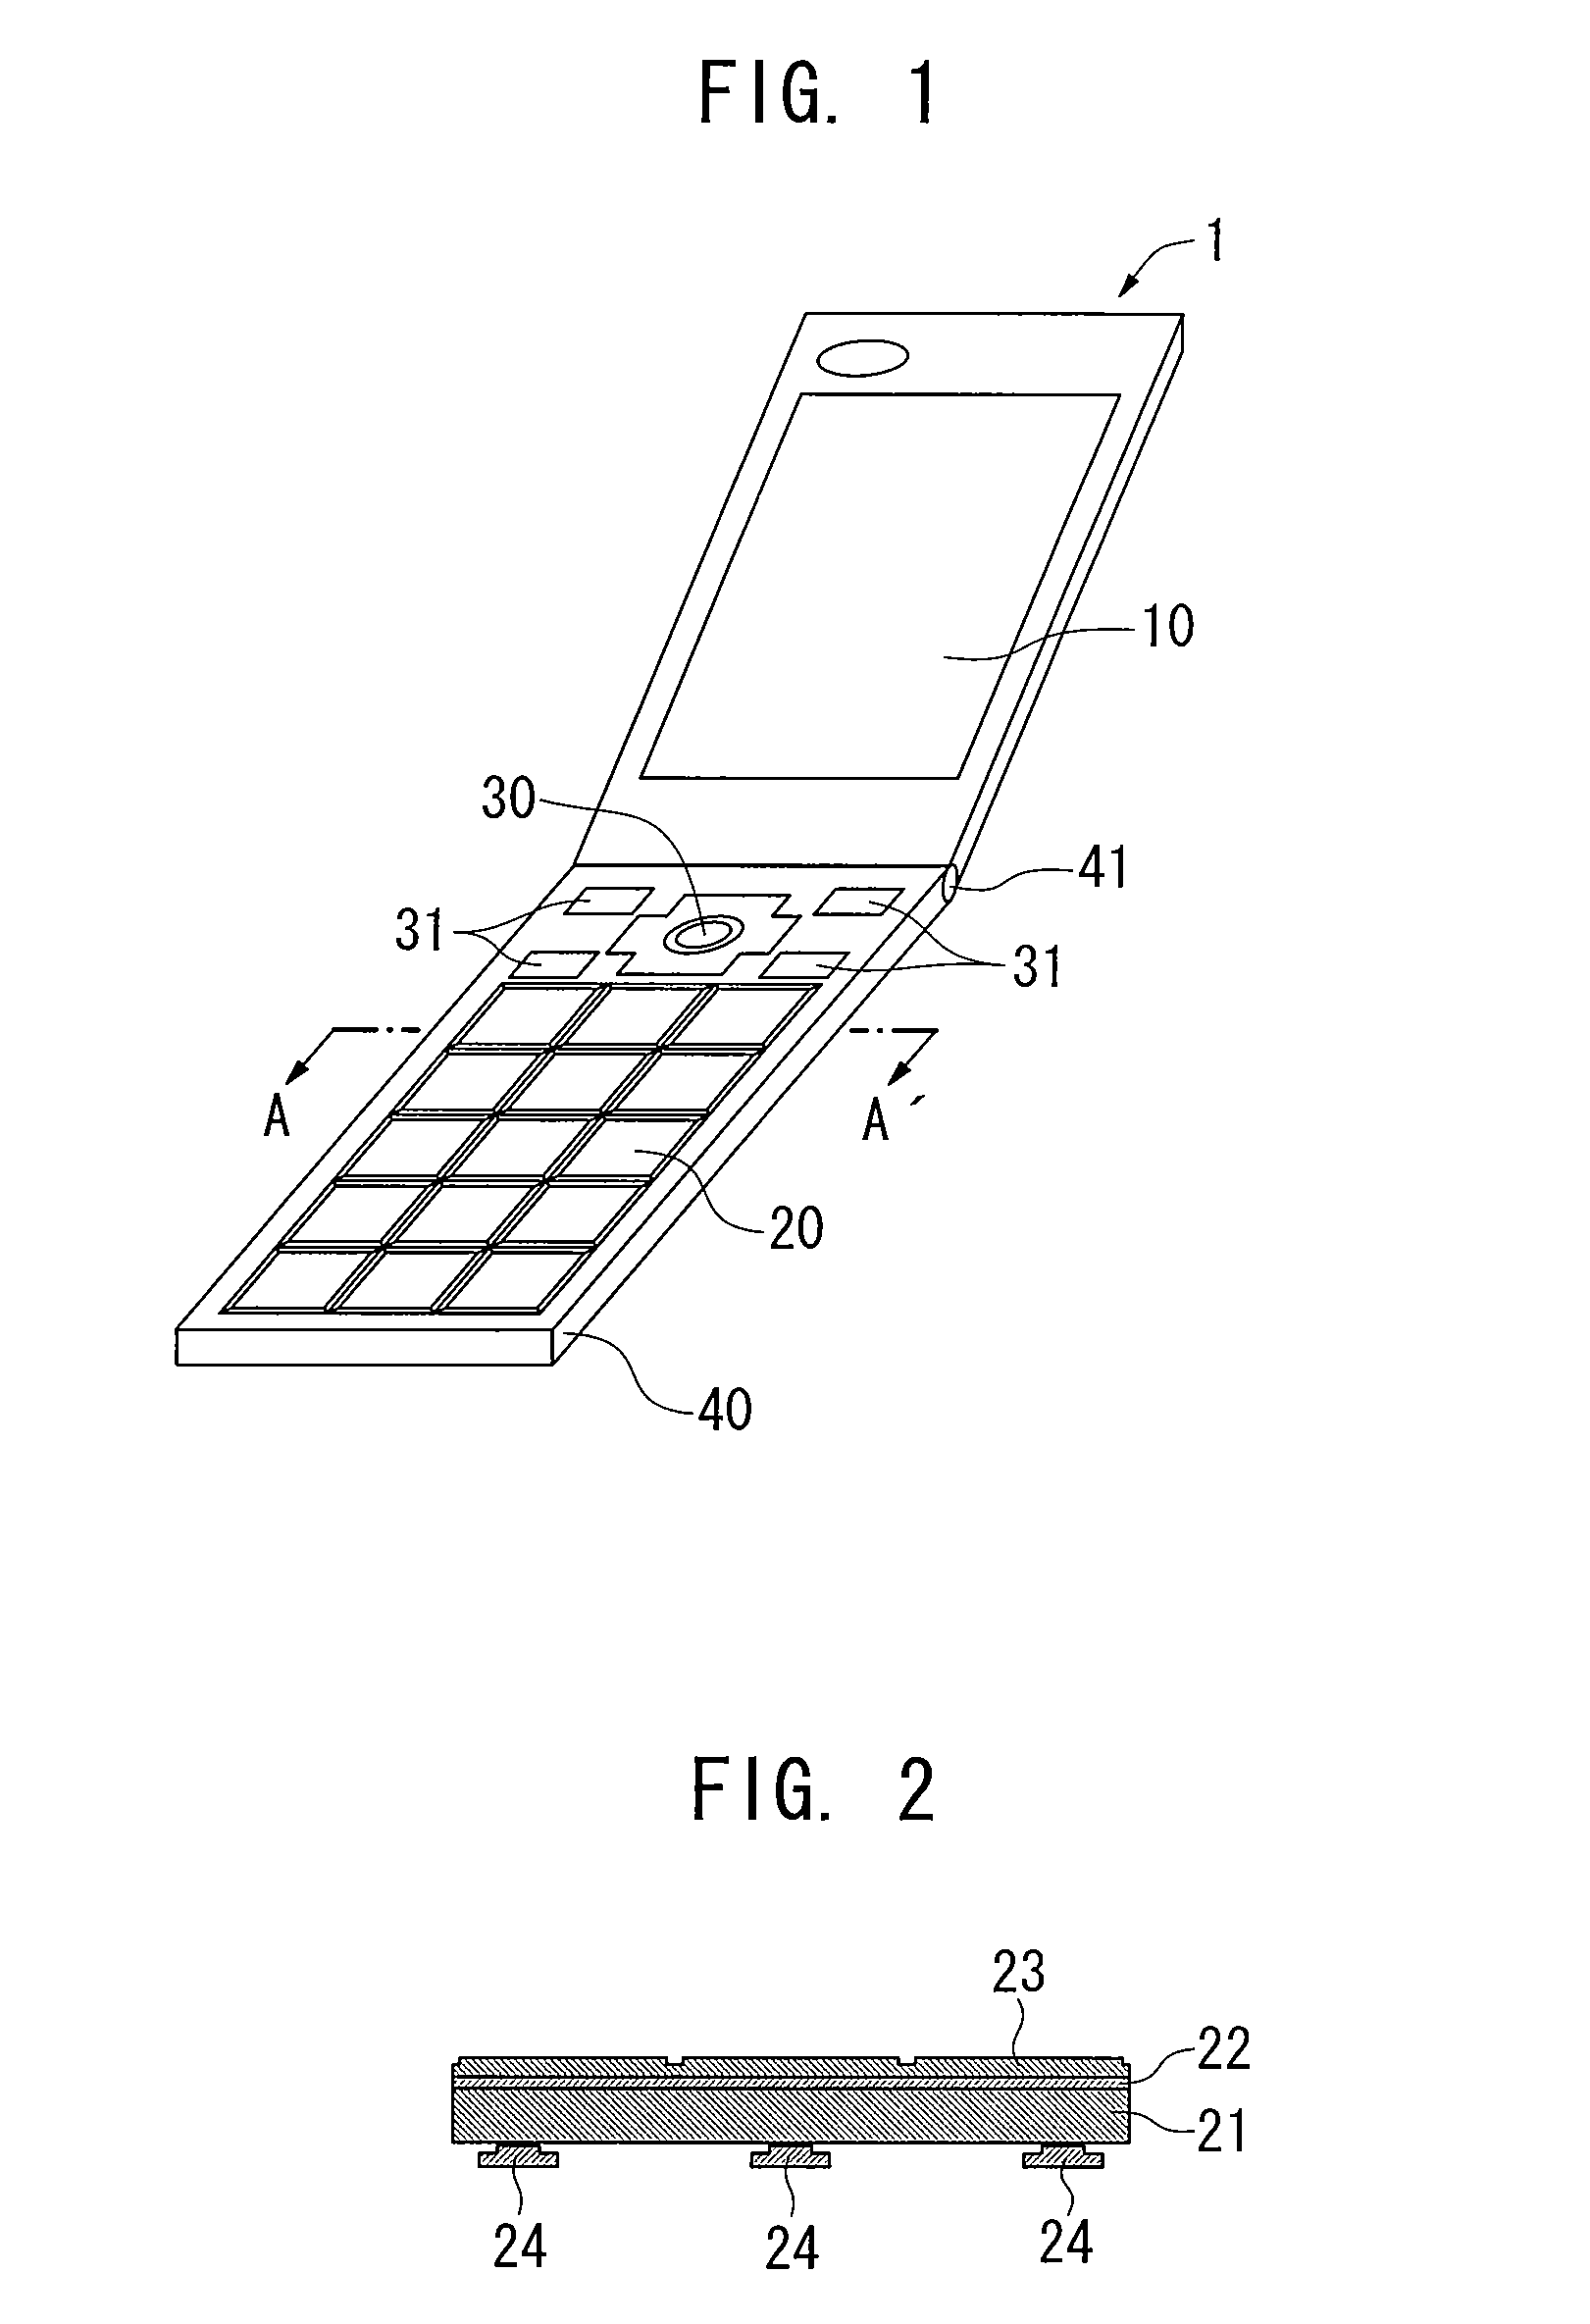 Touch screen-type input device